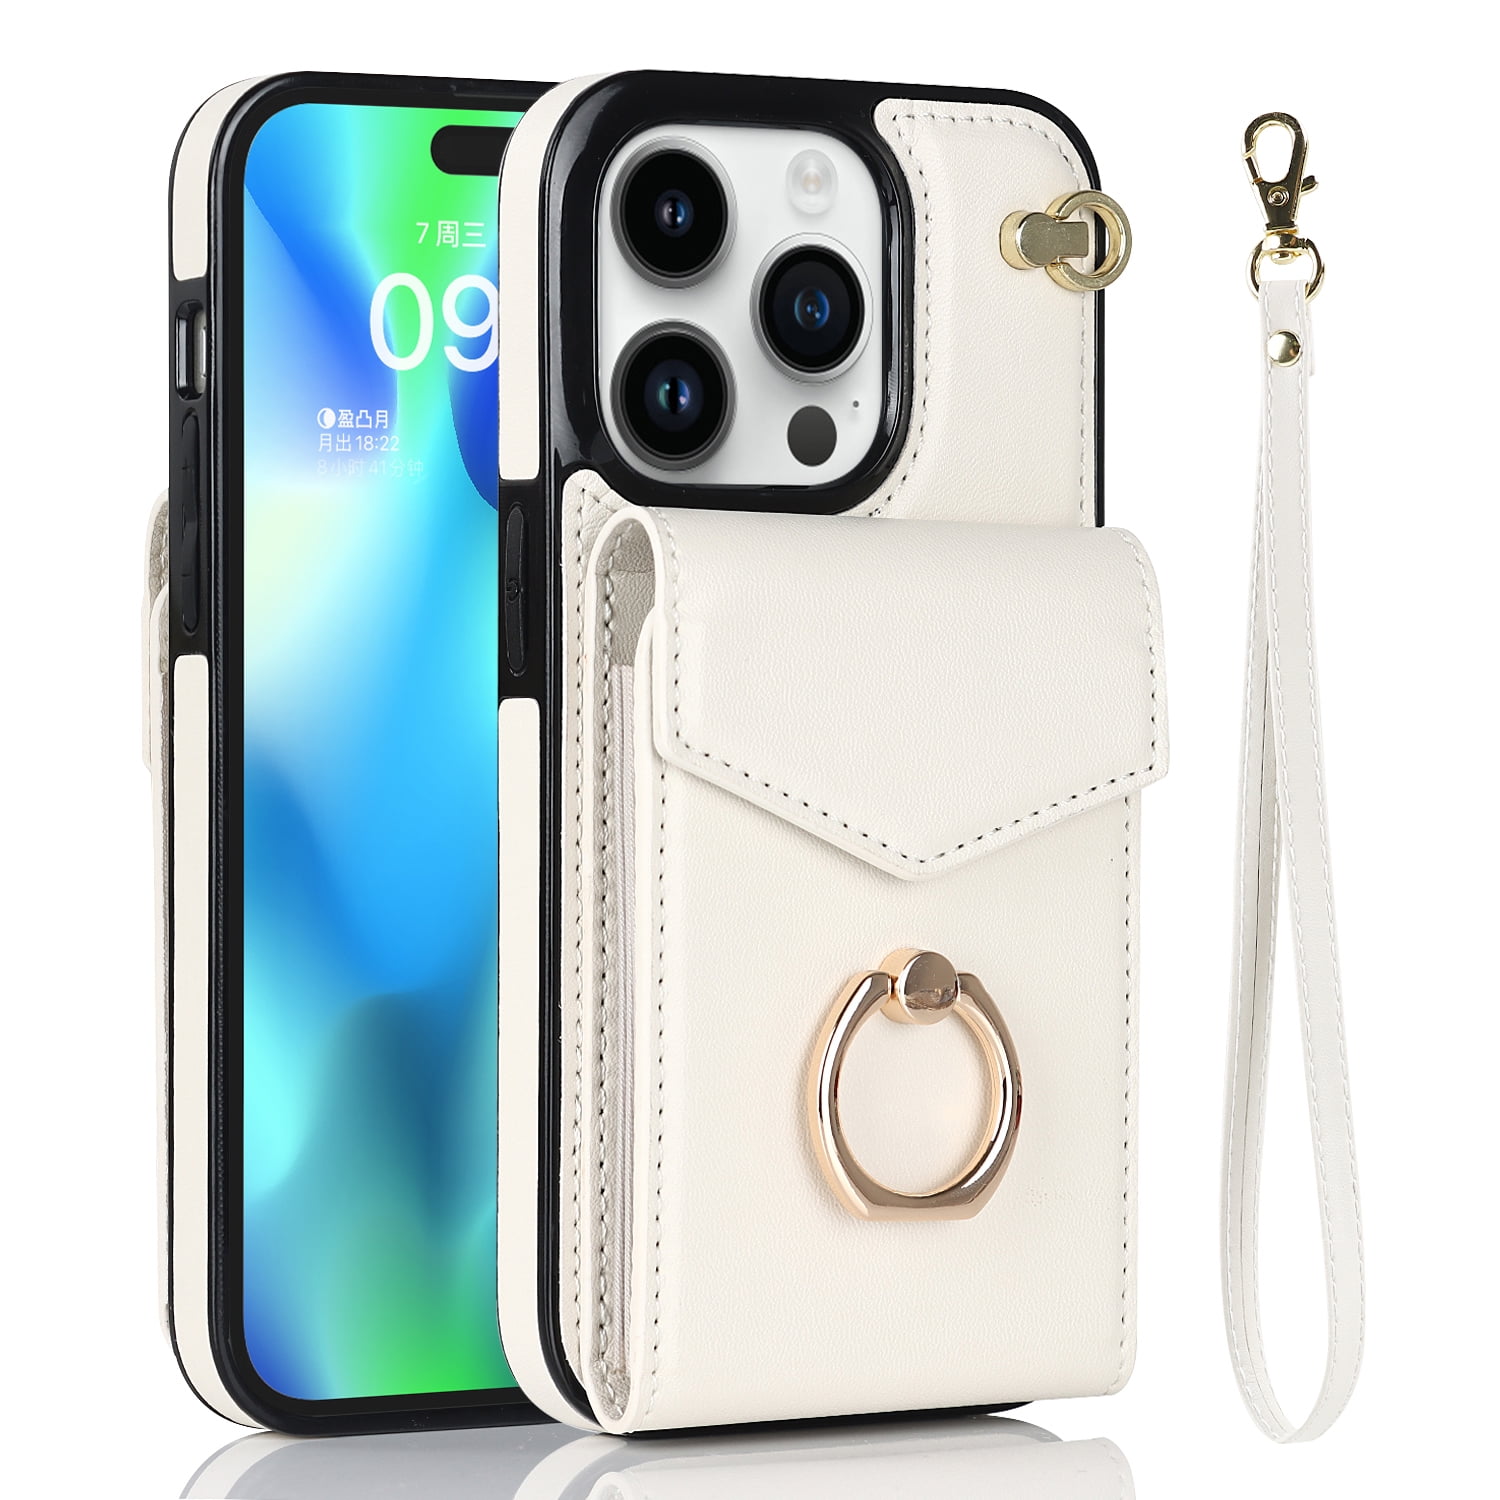 TECH CIRCLE Wallet Case for iPhone 14 Pro Max, PU Leather Case with Card  Holder 360°Rotation Ring Kickstand Protective Wrist Strap Case for Apple iPhone  14 Pro Max 6.7 inch,White 